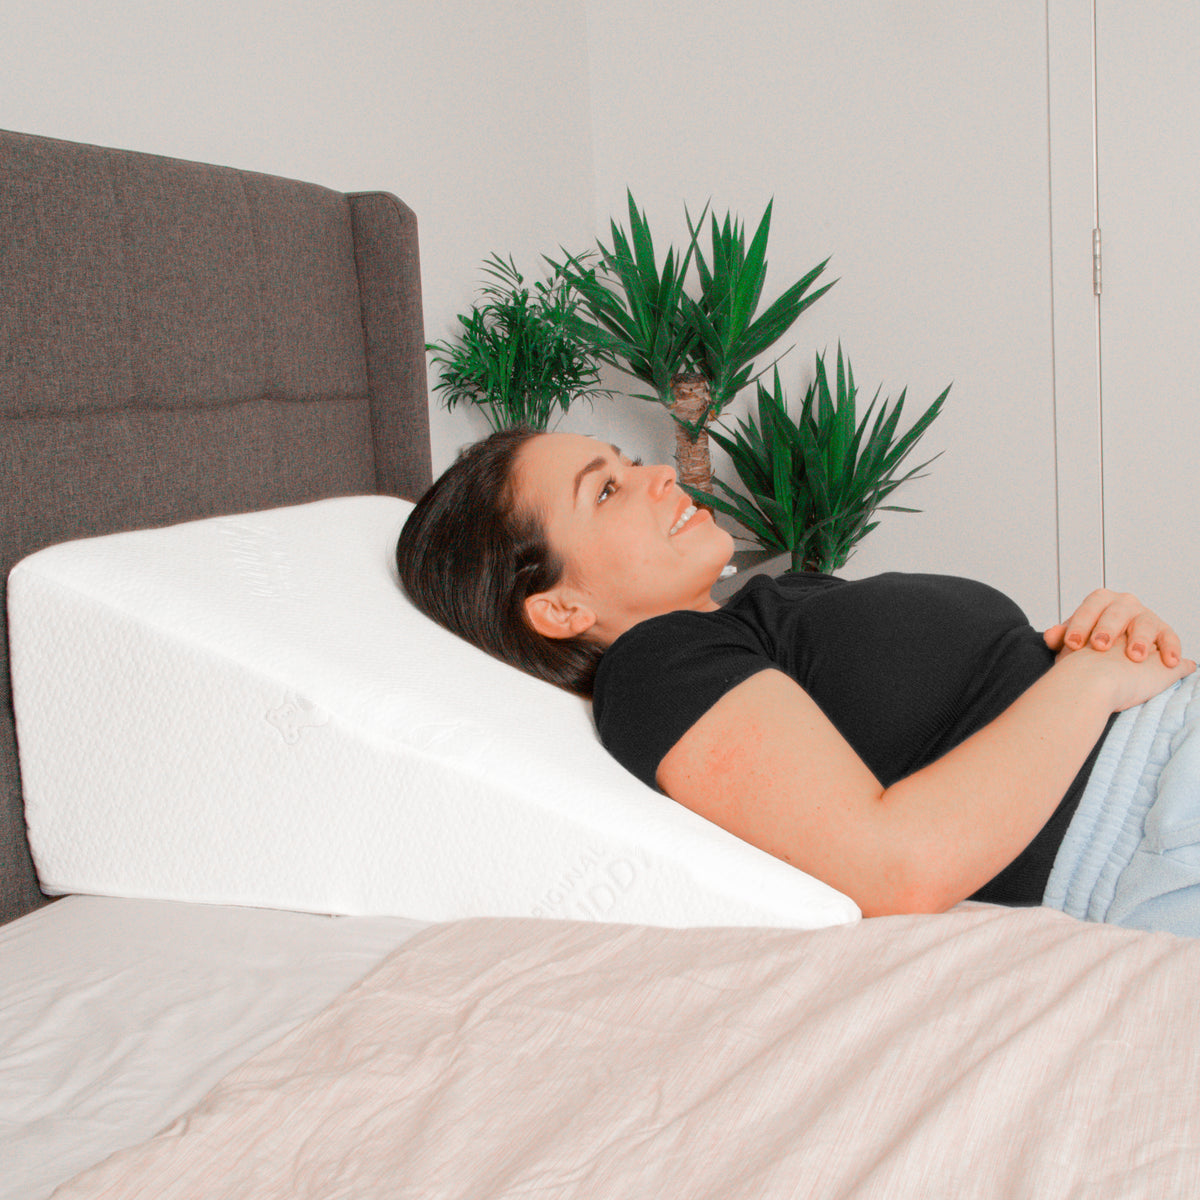 Sleeping positions for back pain relief: On your back in a reclined position